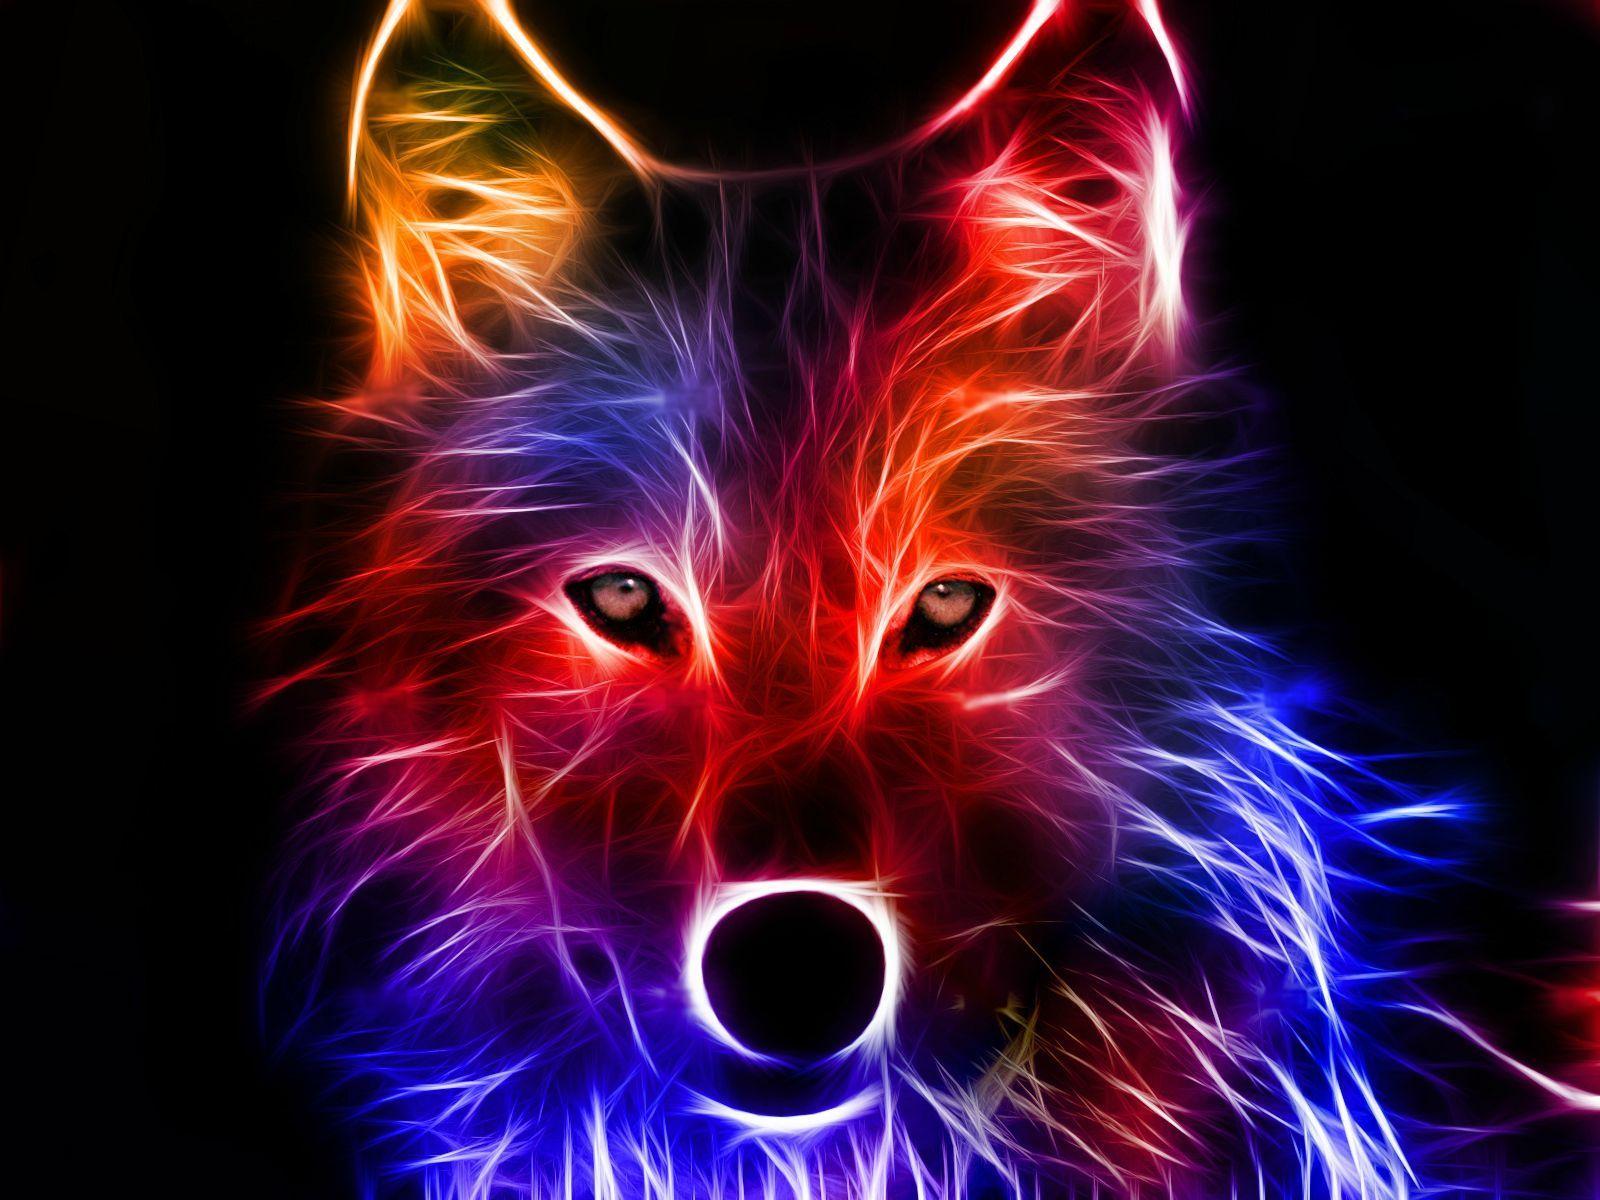 3D Wallpaper Free to Download. Wolf wallpaper, Abstract wolf, Animal wallpaper